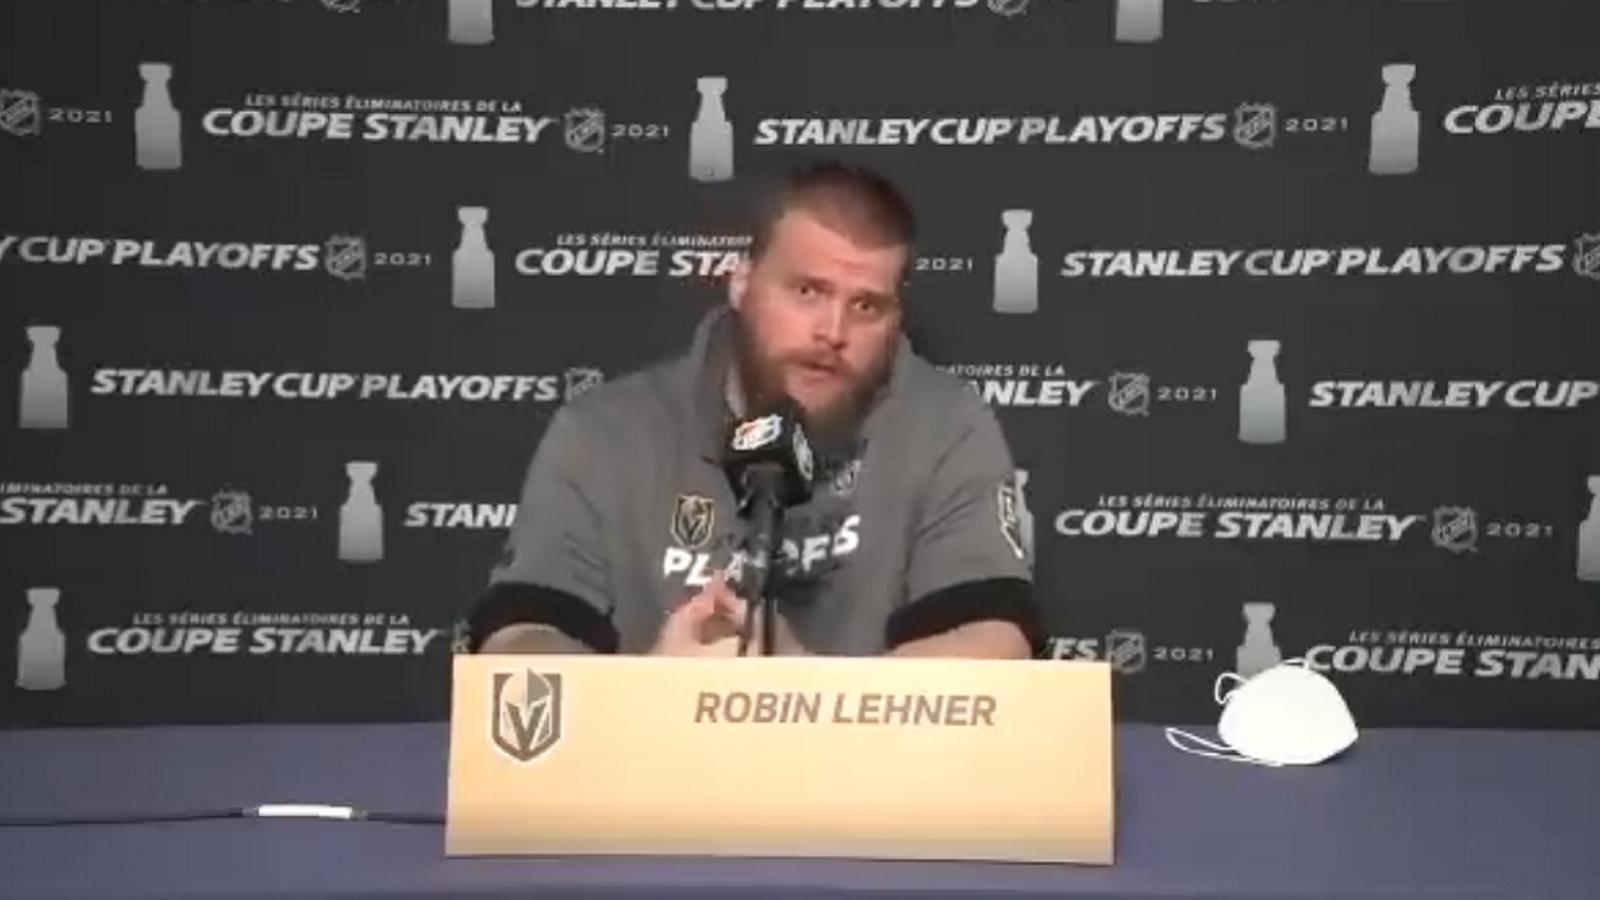 Robin Lehner sends a strong message to all the Canadiens fans out there.